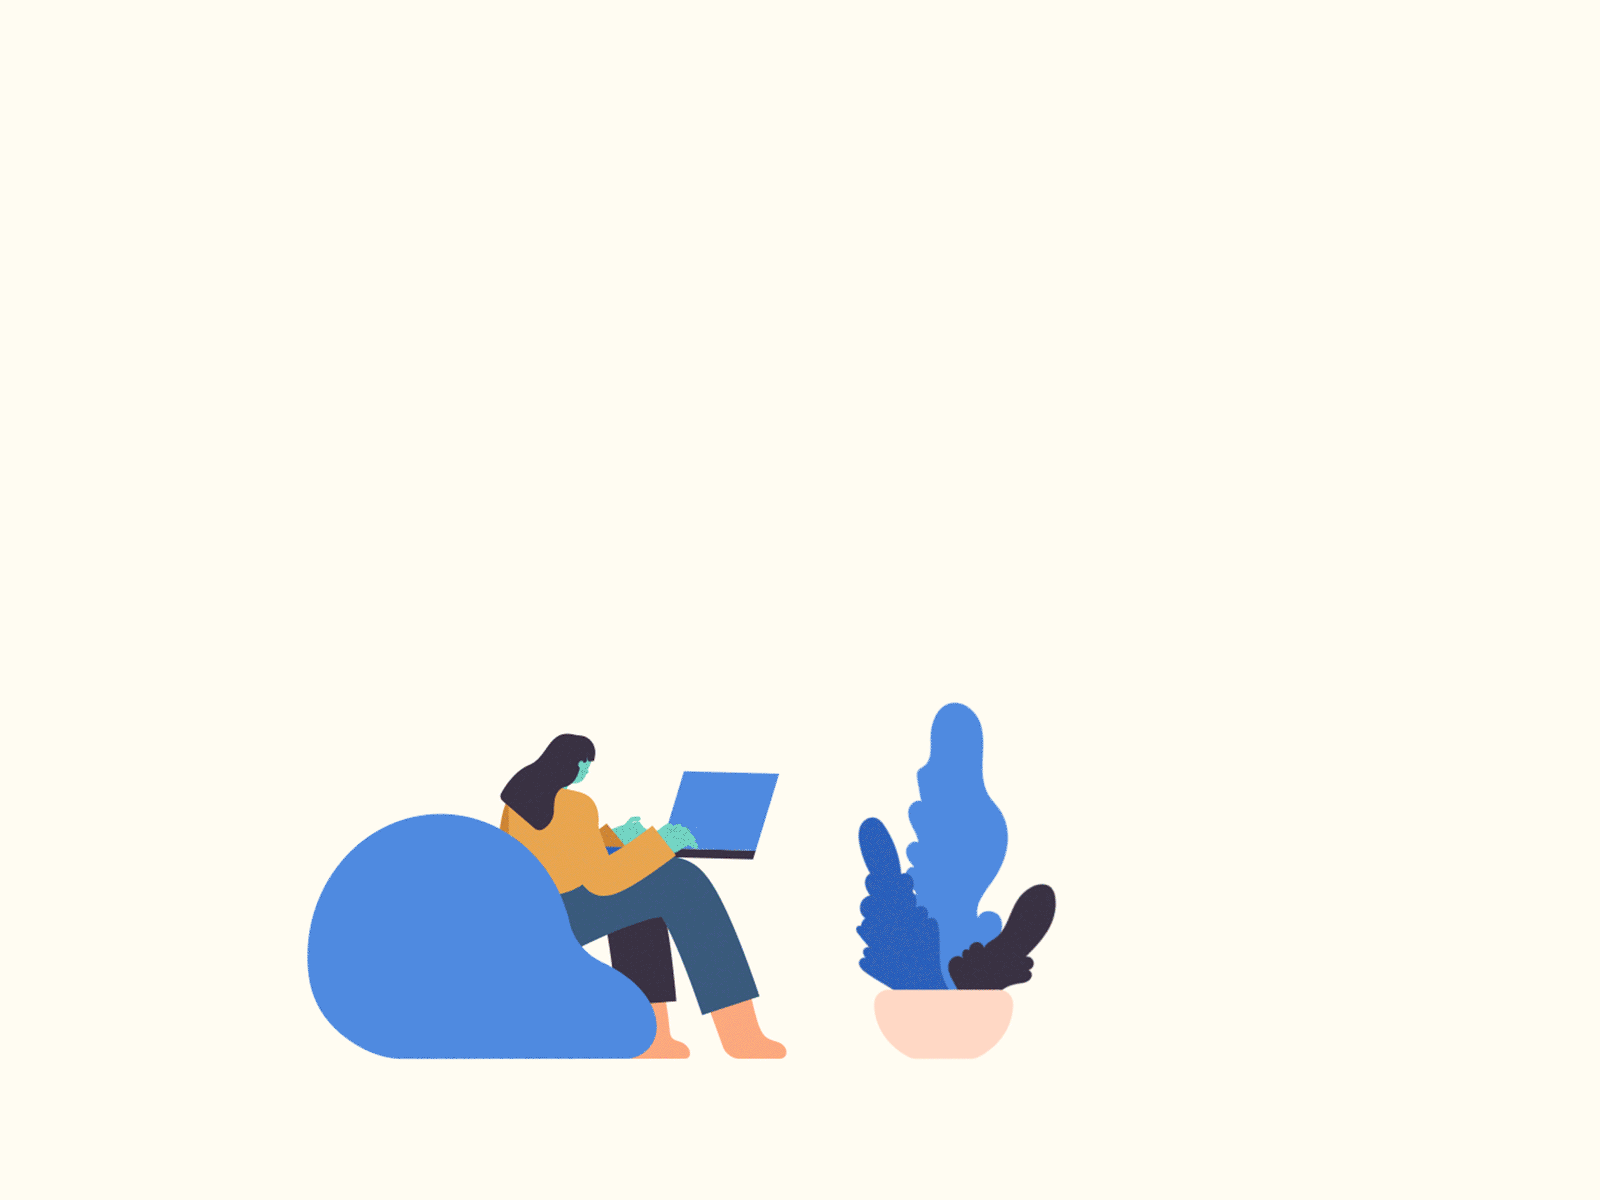 Group Chat animated illustration